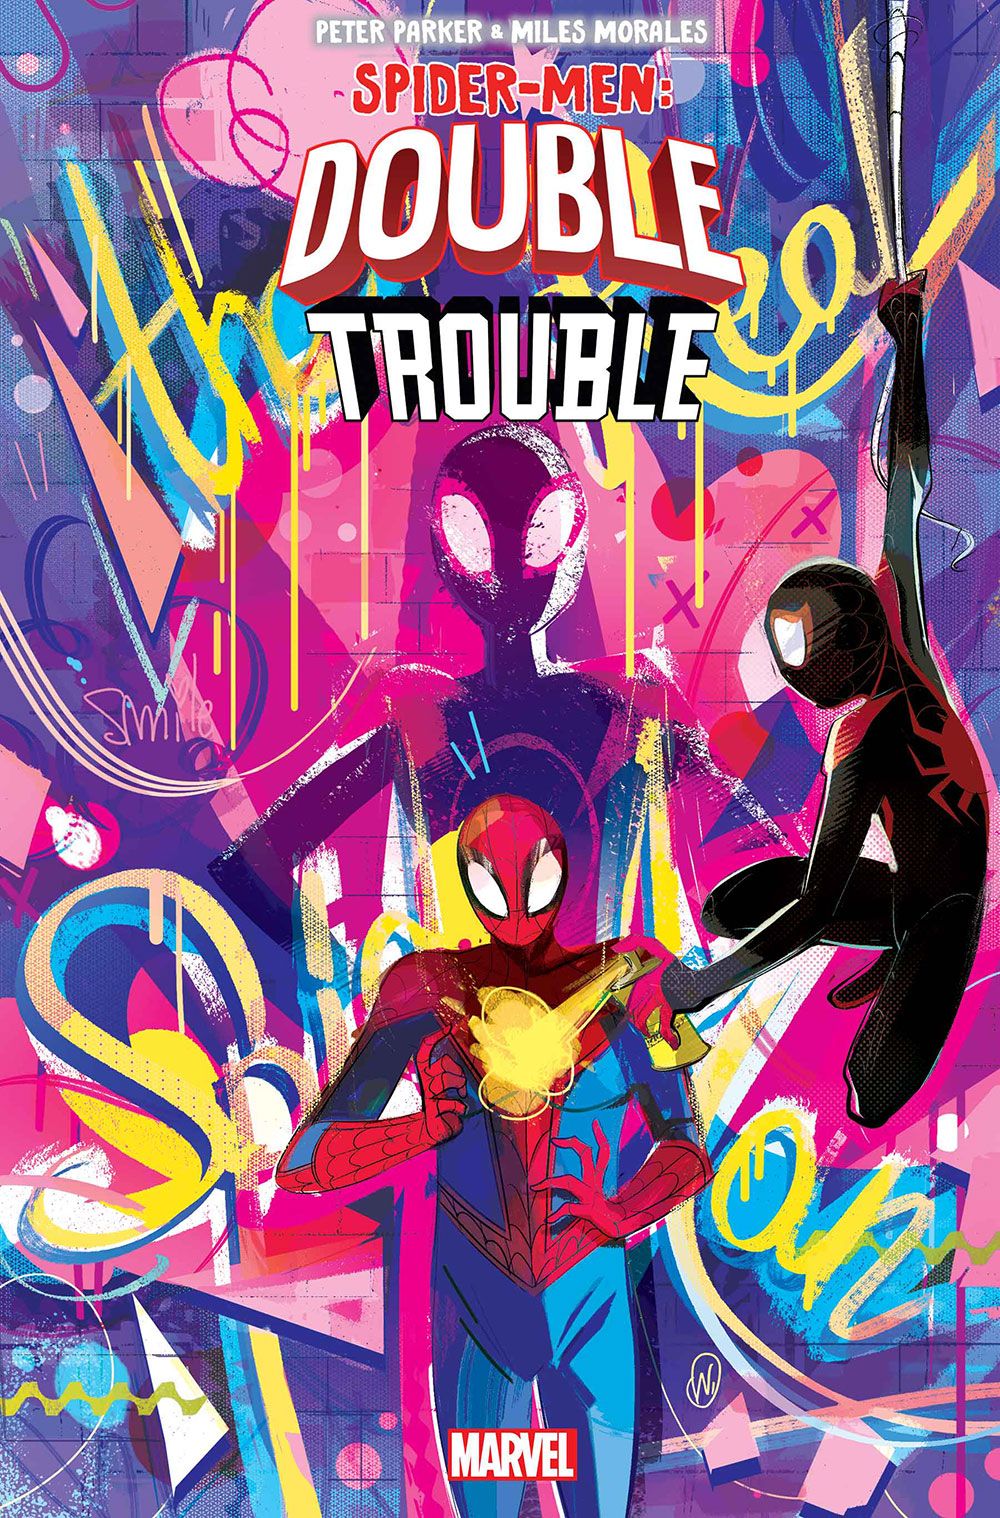 marvel solicits